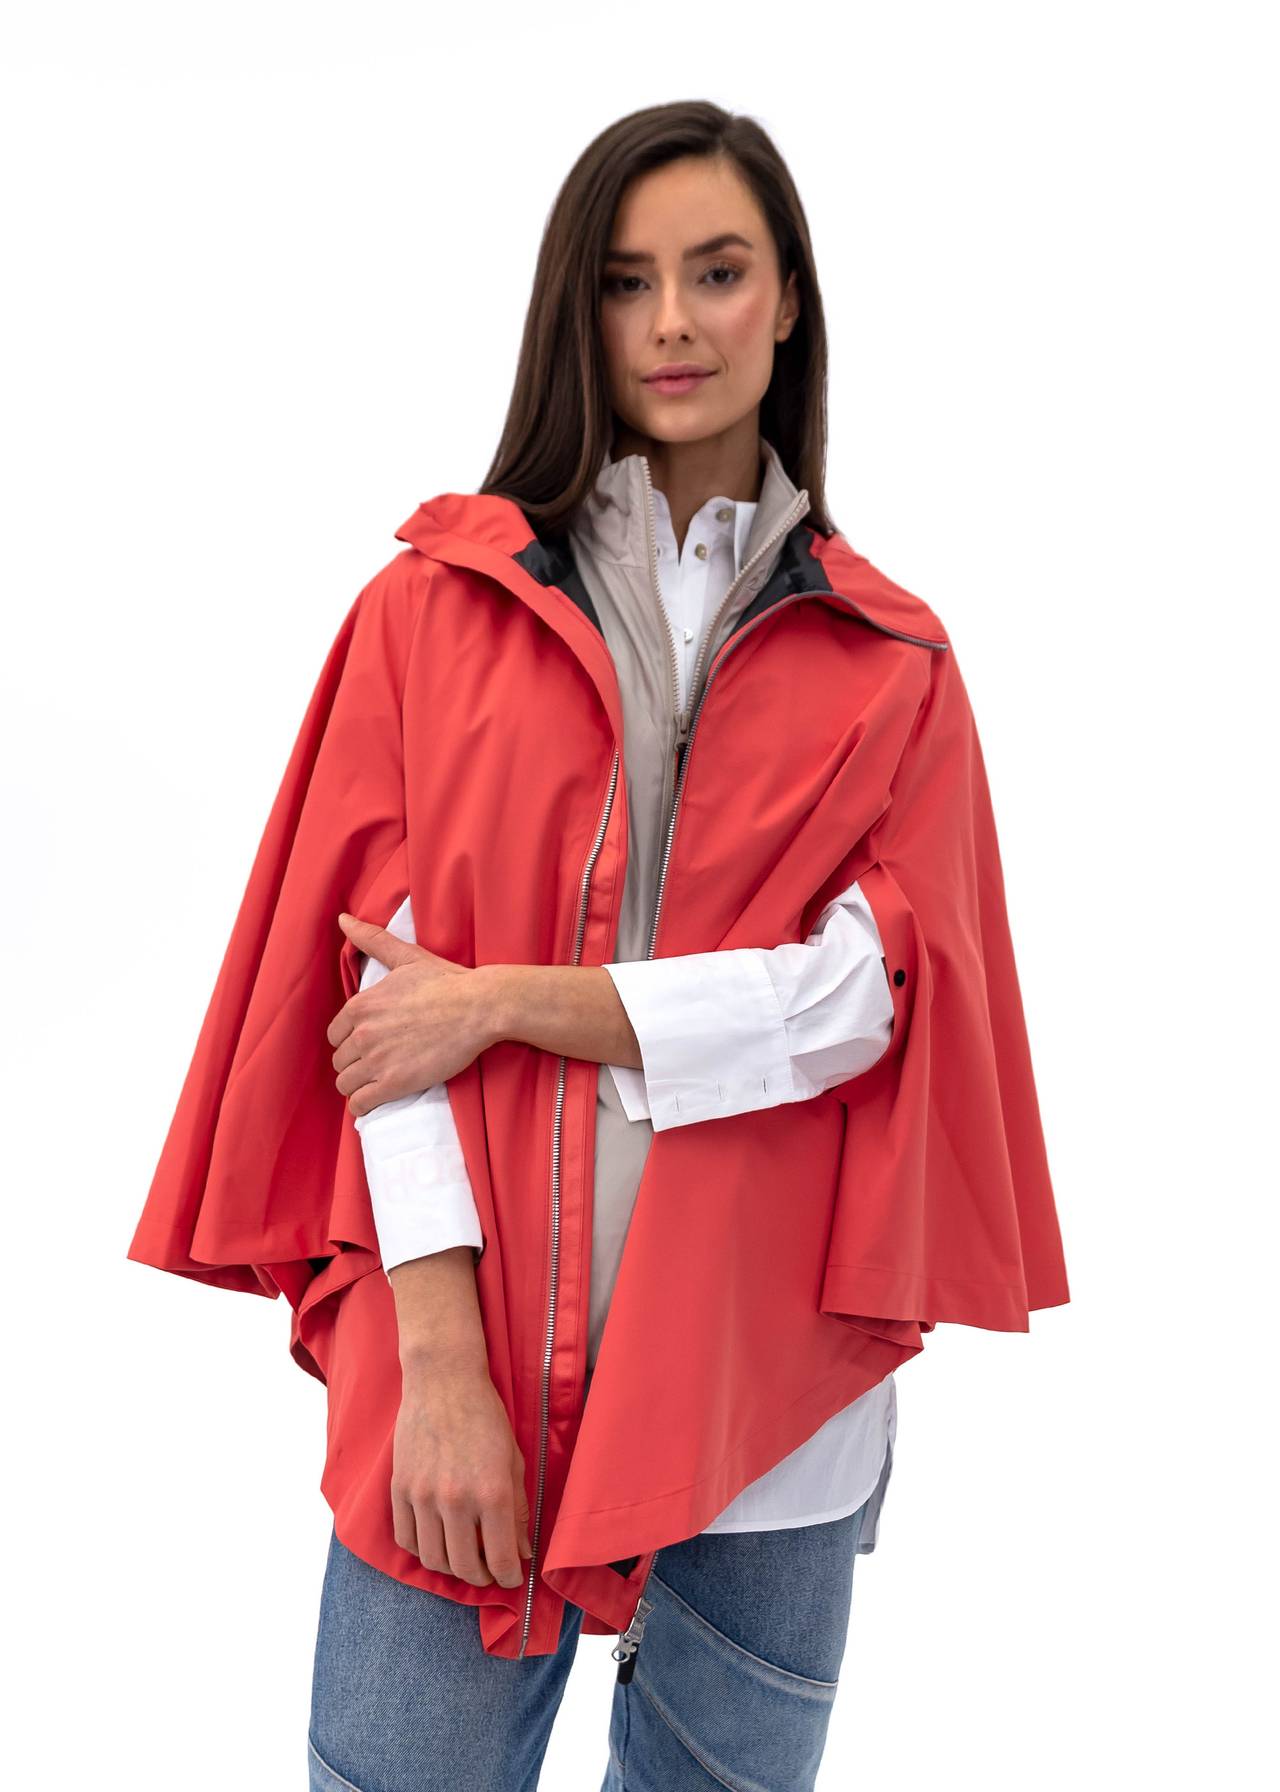 The Womens Poncho - Sunset Sky